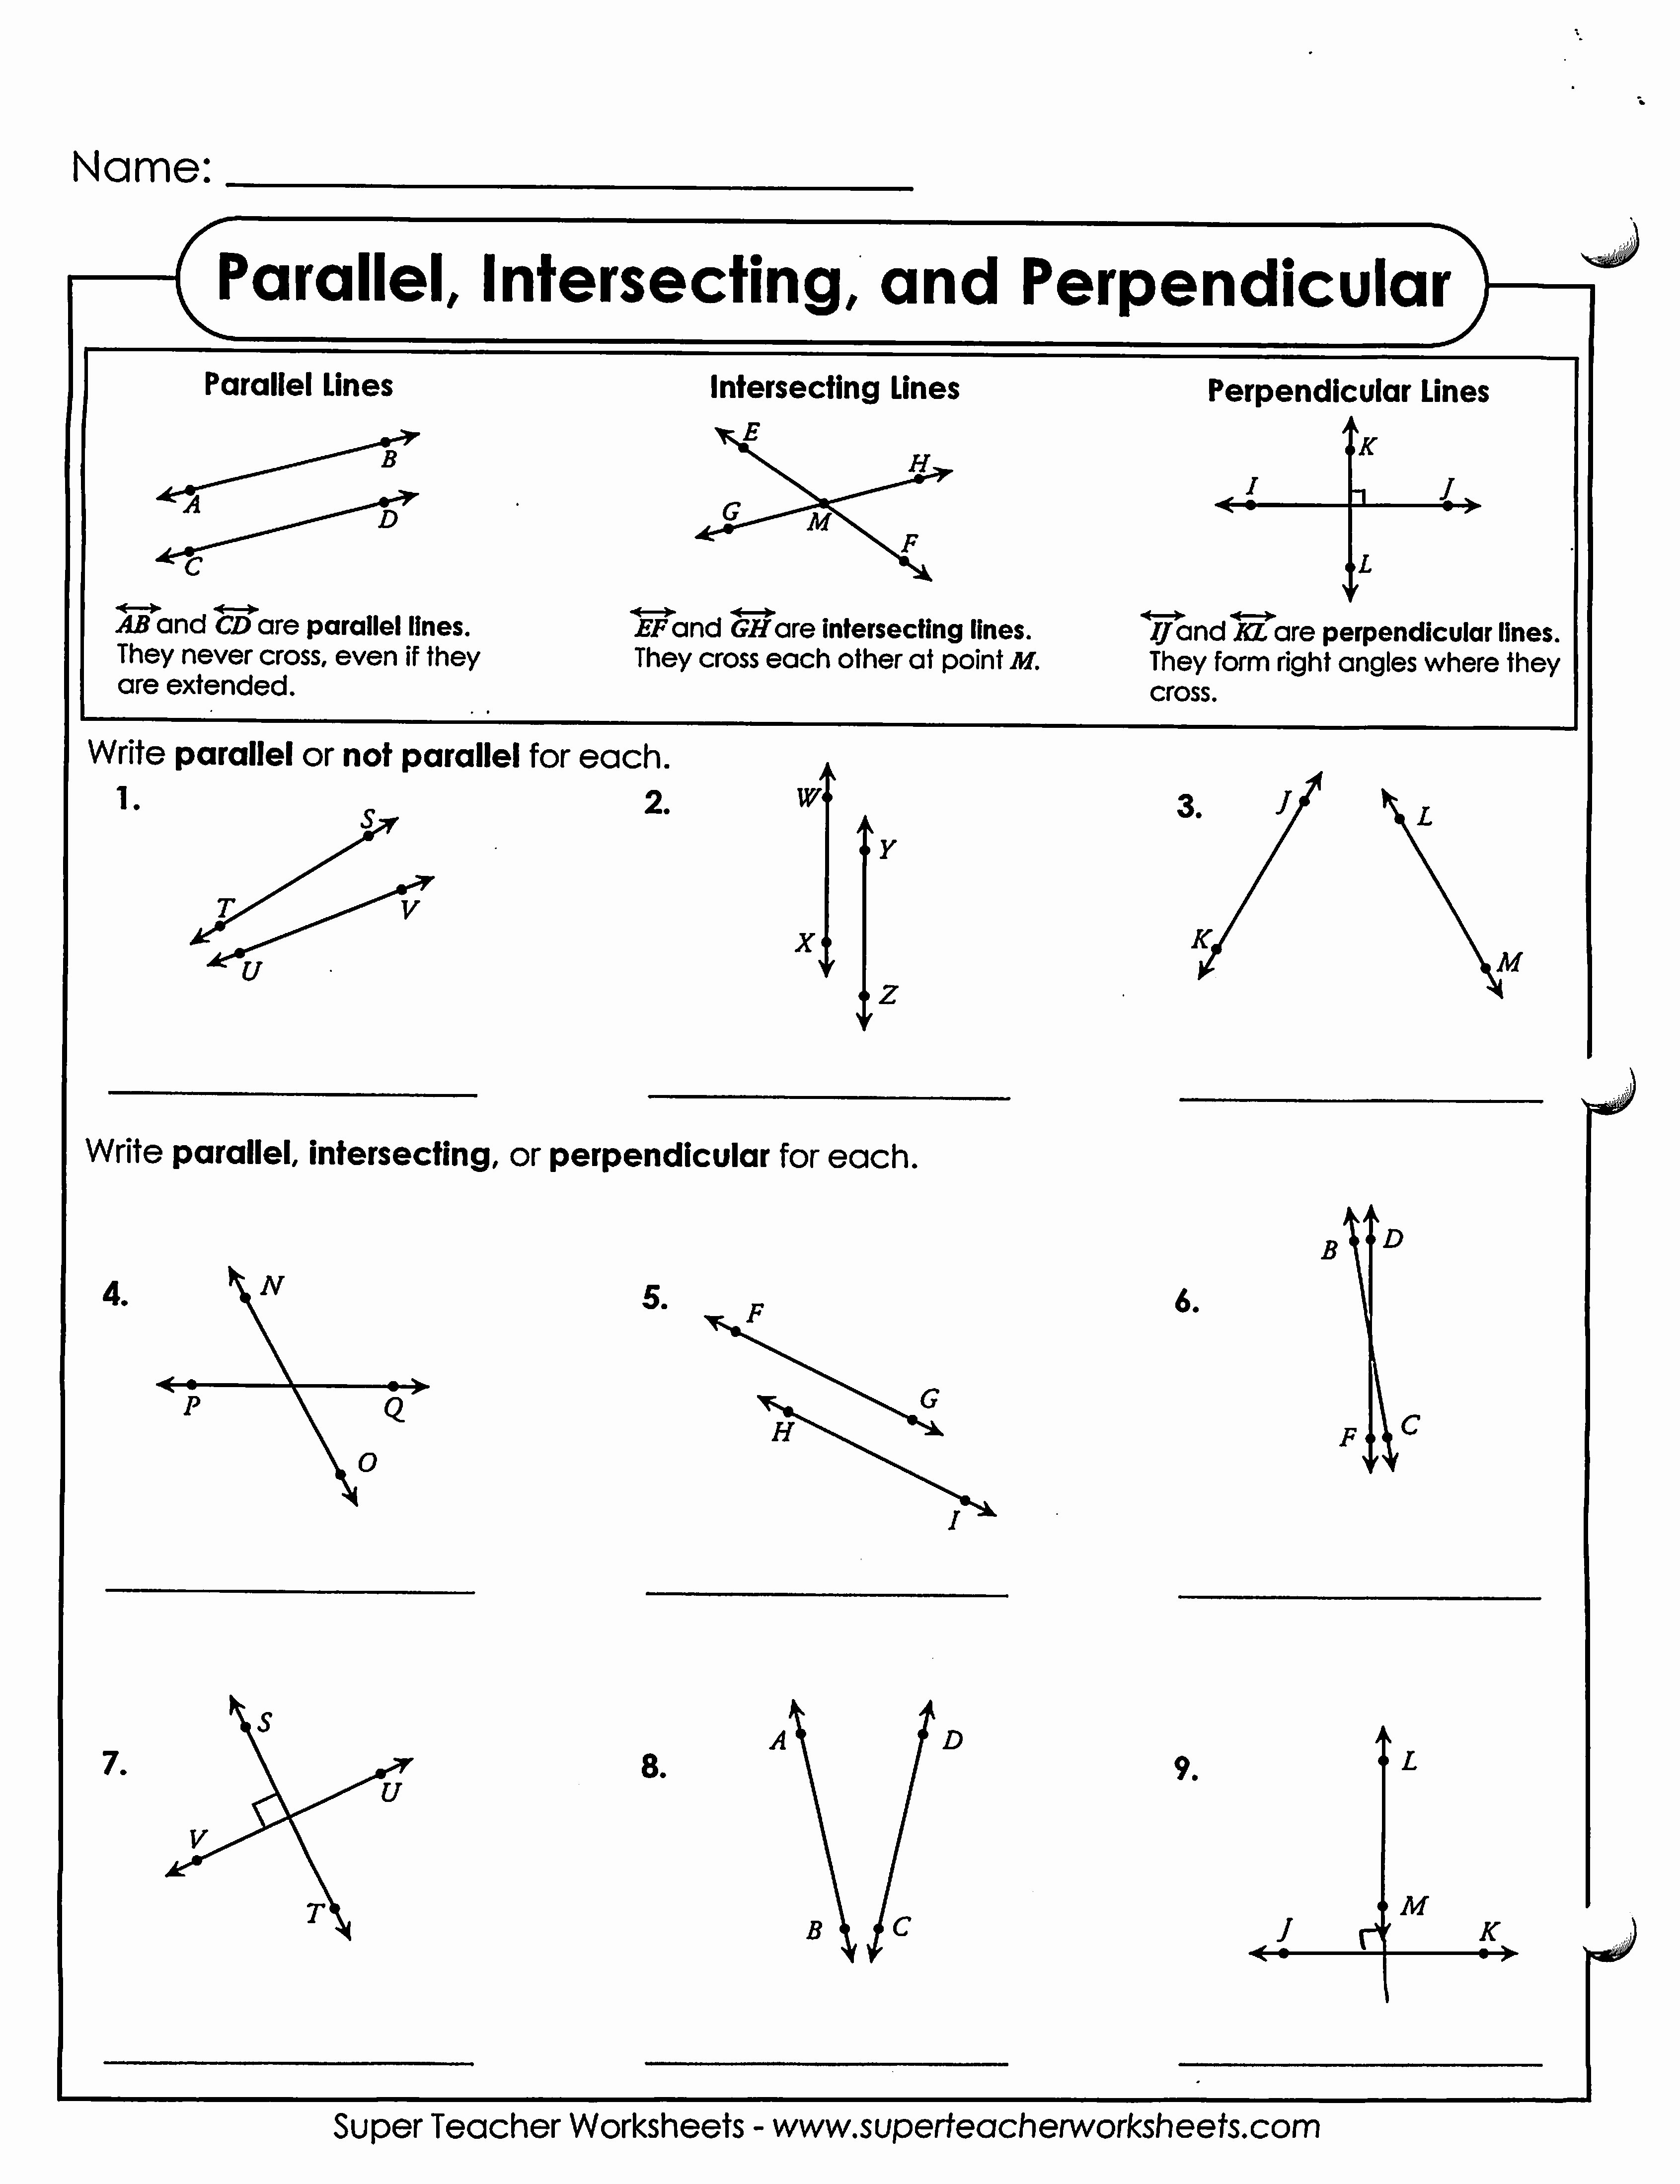 Parallel and Perpendicular Lines Worksheet Fresh Math Ms Csipak S assignments for 2015